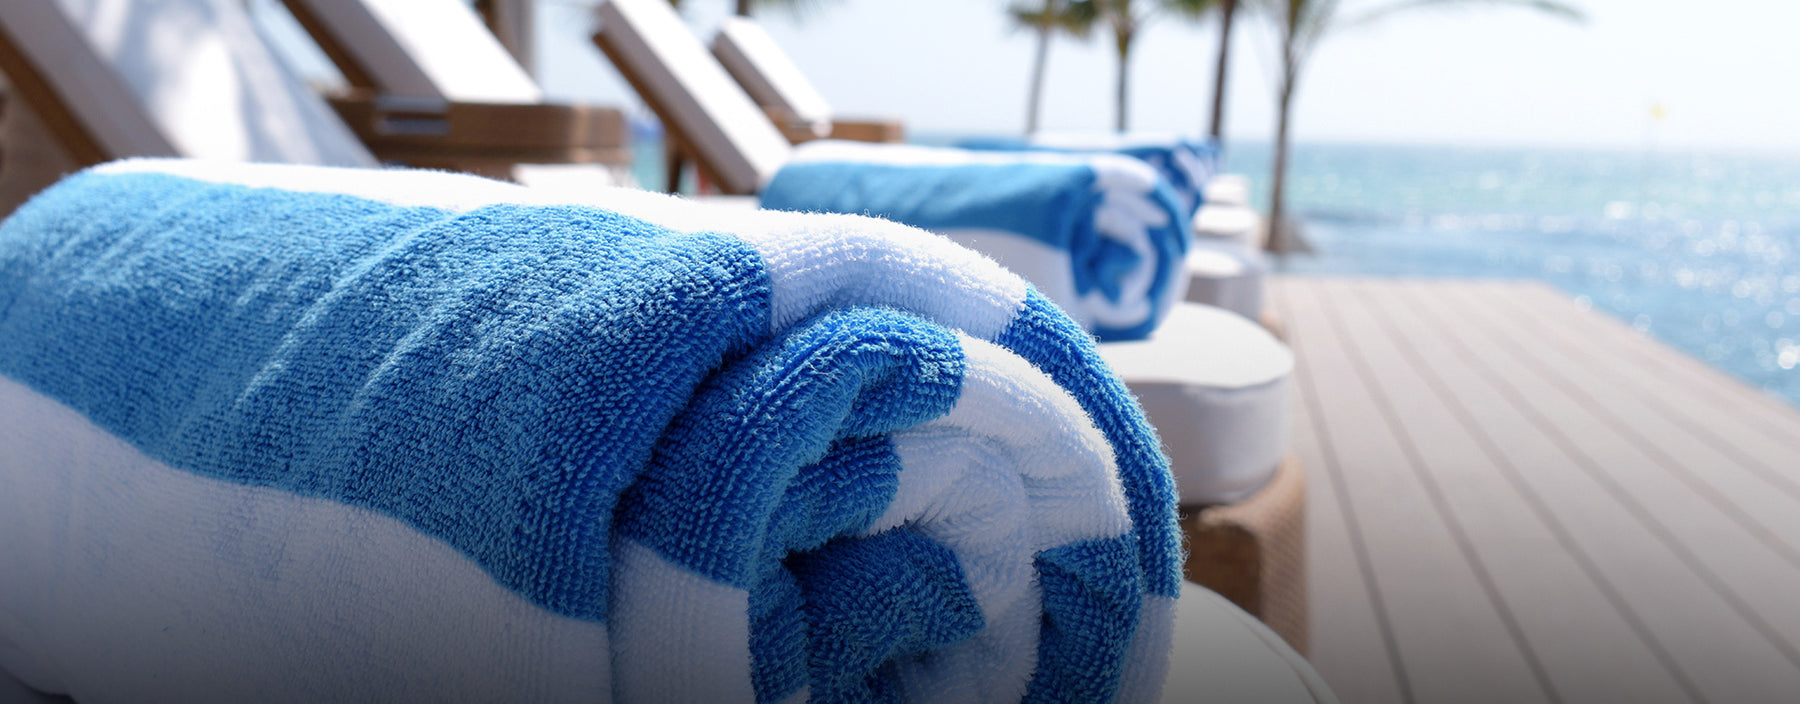 Get Summer Ready with Beach Towels on Sale - Shop online now